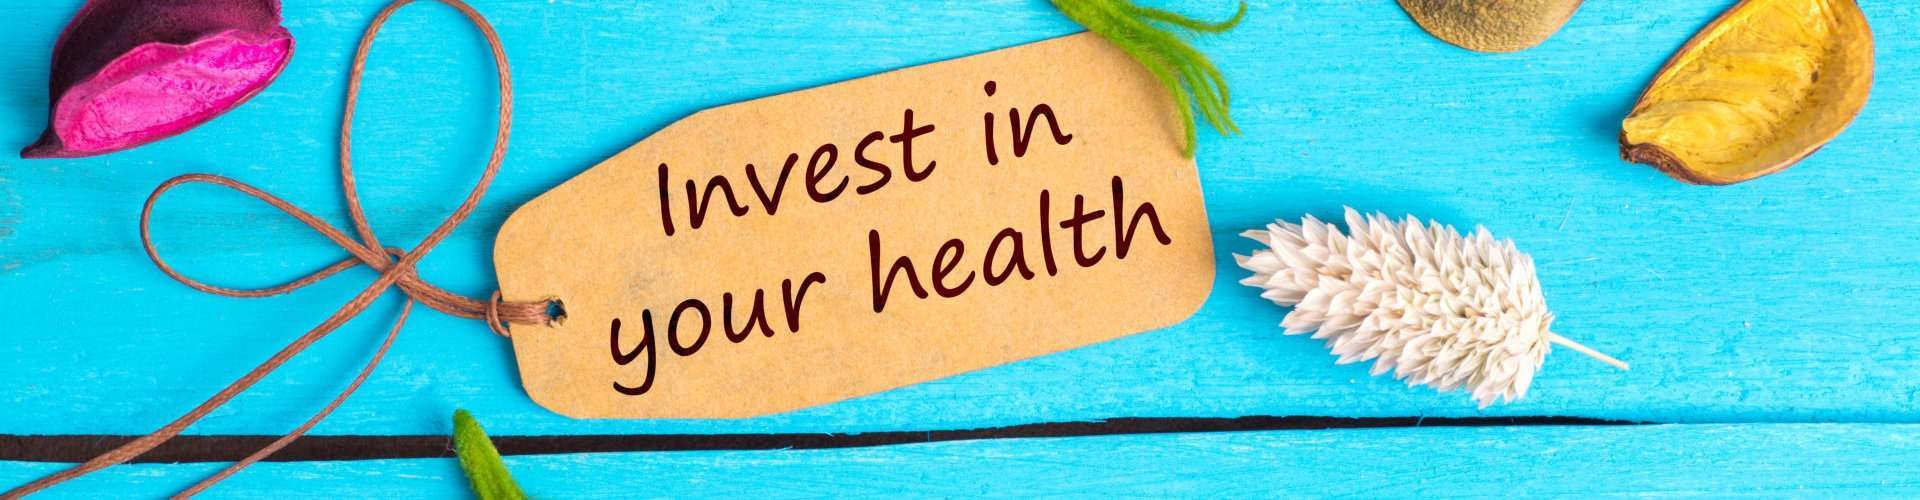 invest on your health